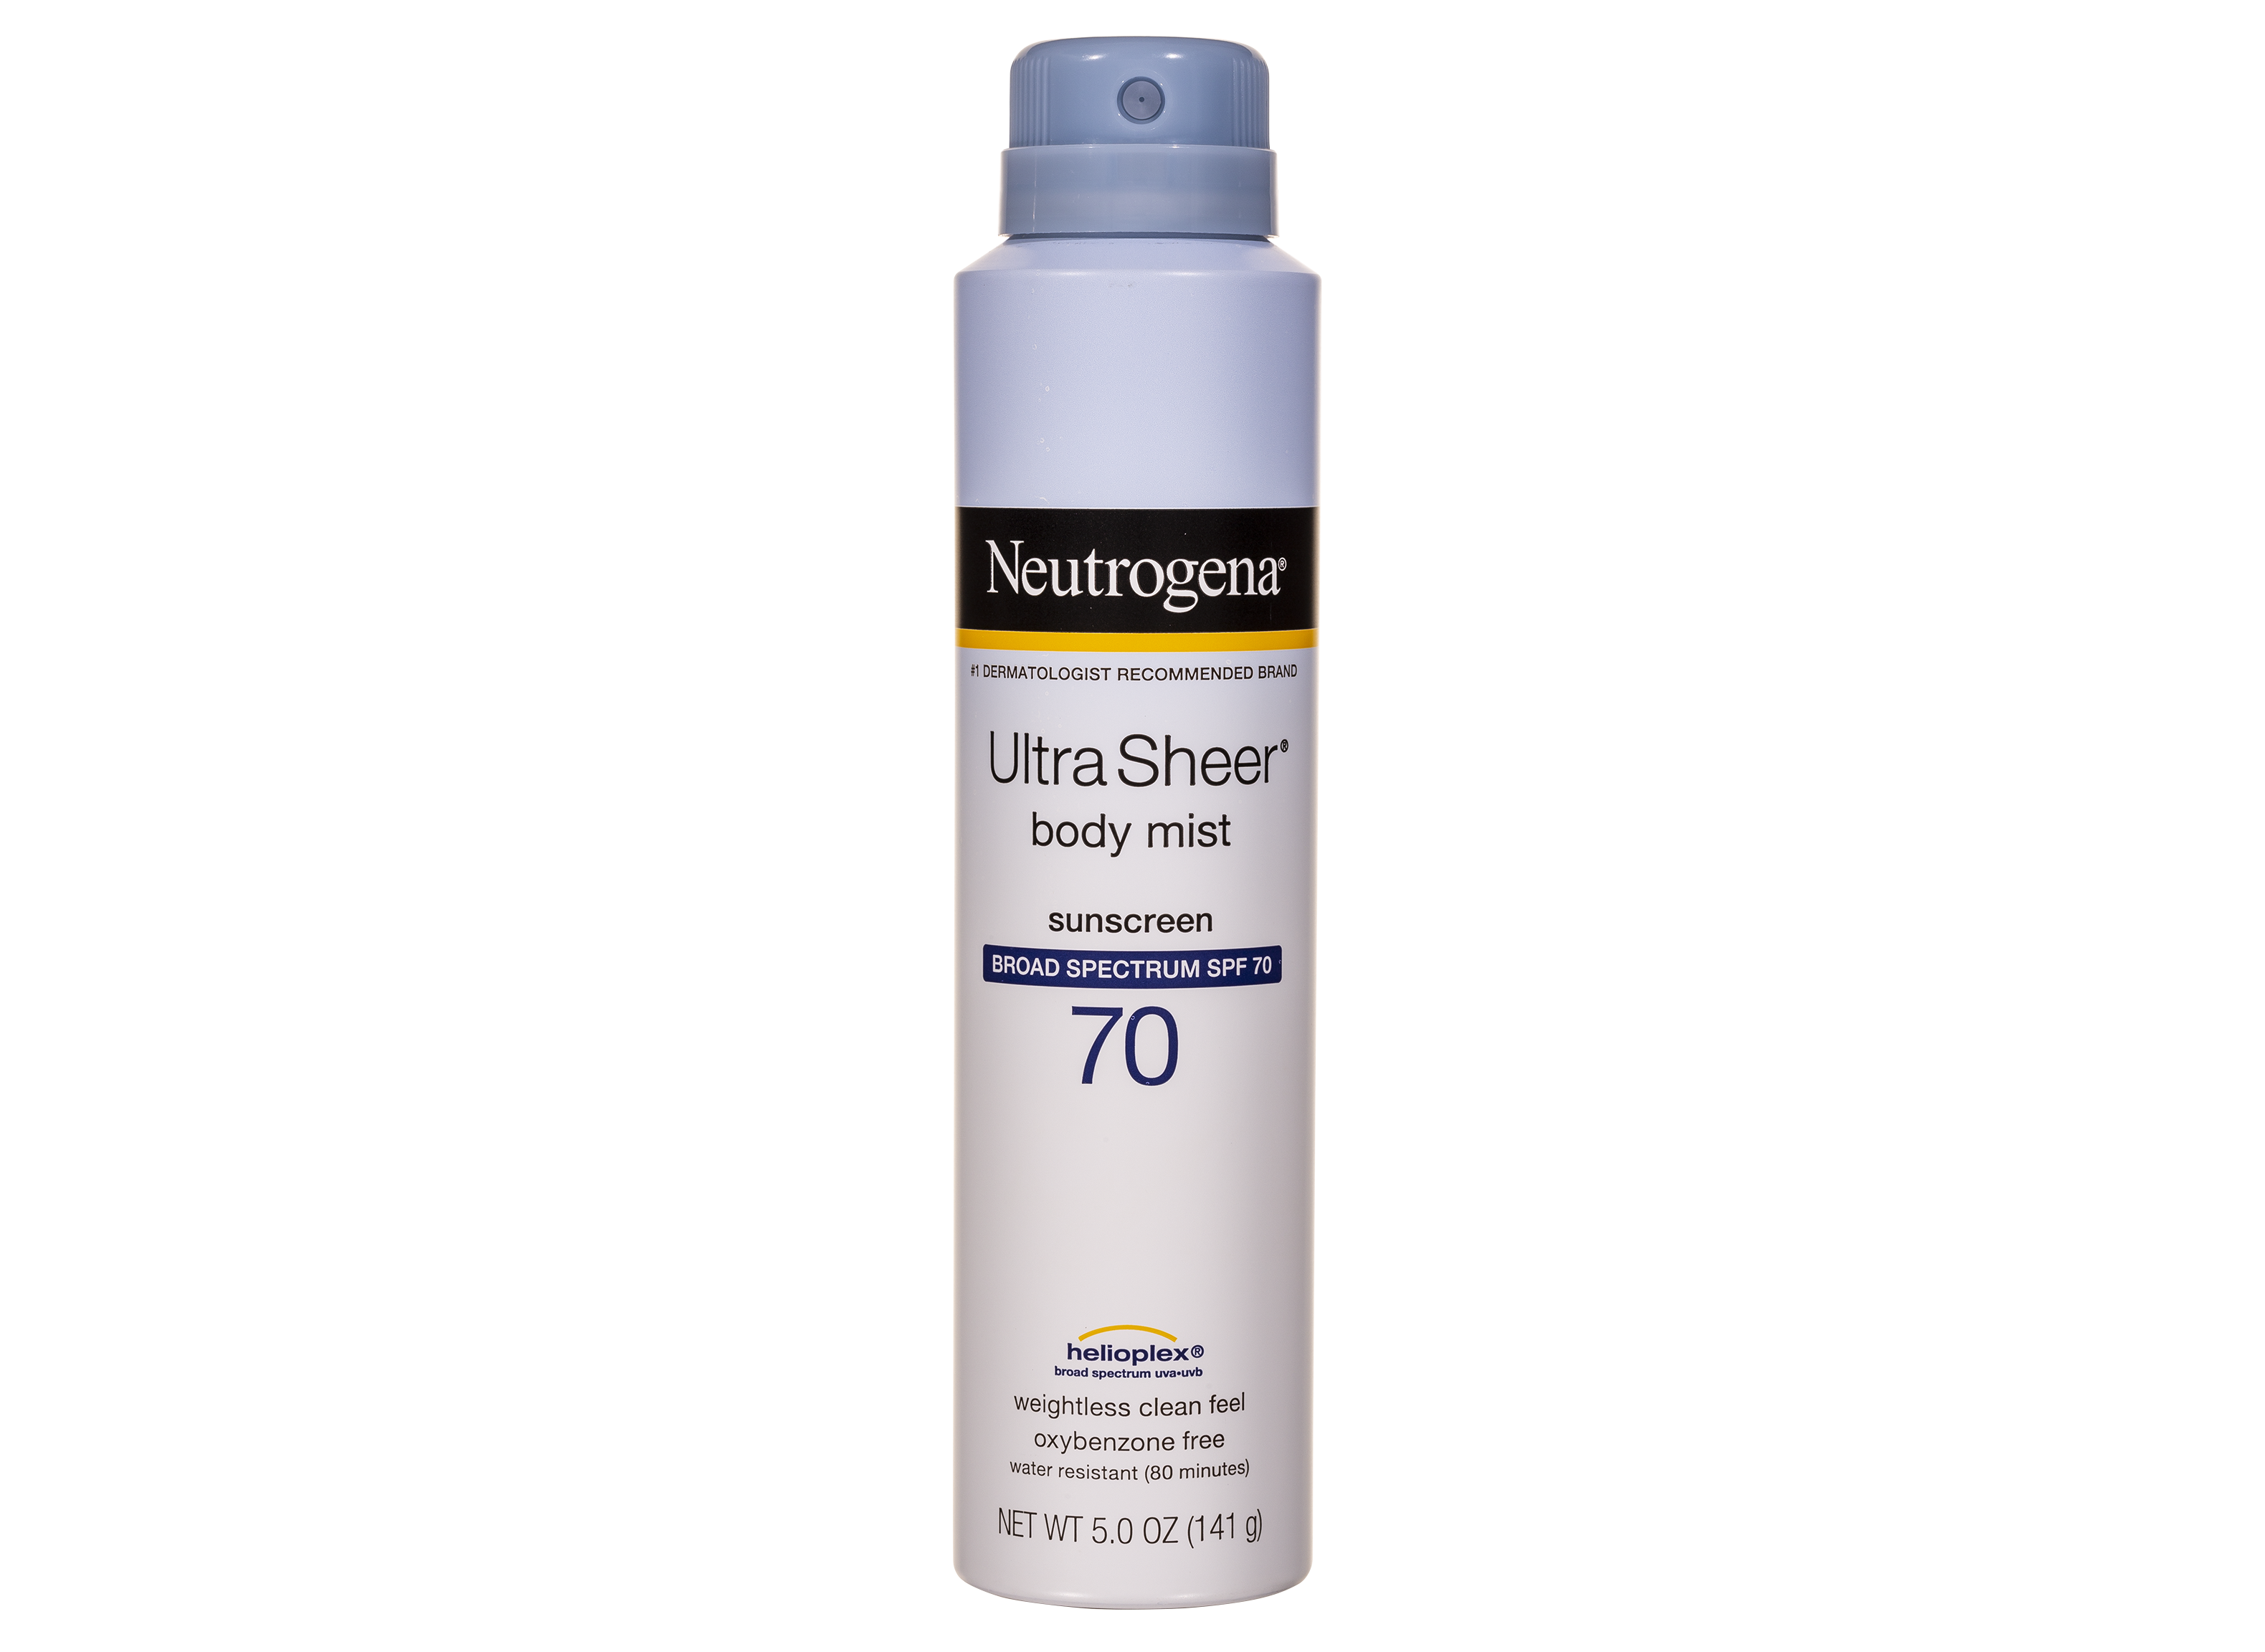 https://crdms.images.consumerreports.org/prod/products/cr/models/406919-spray-neutrogena-ultra-sheer-body-mist-spf-70-10031458.png